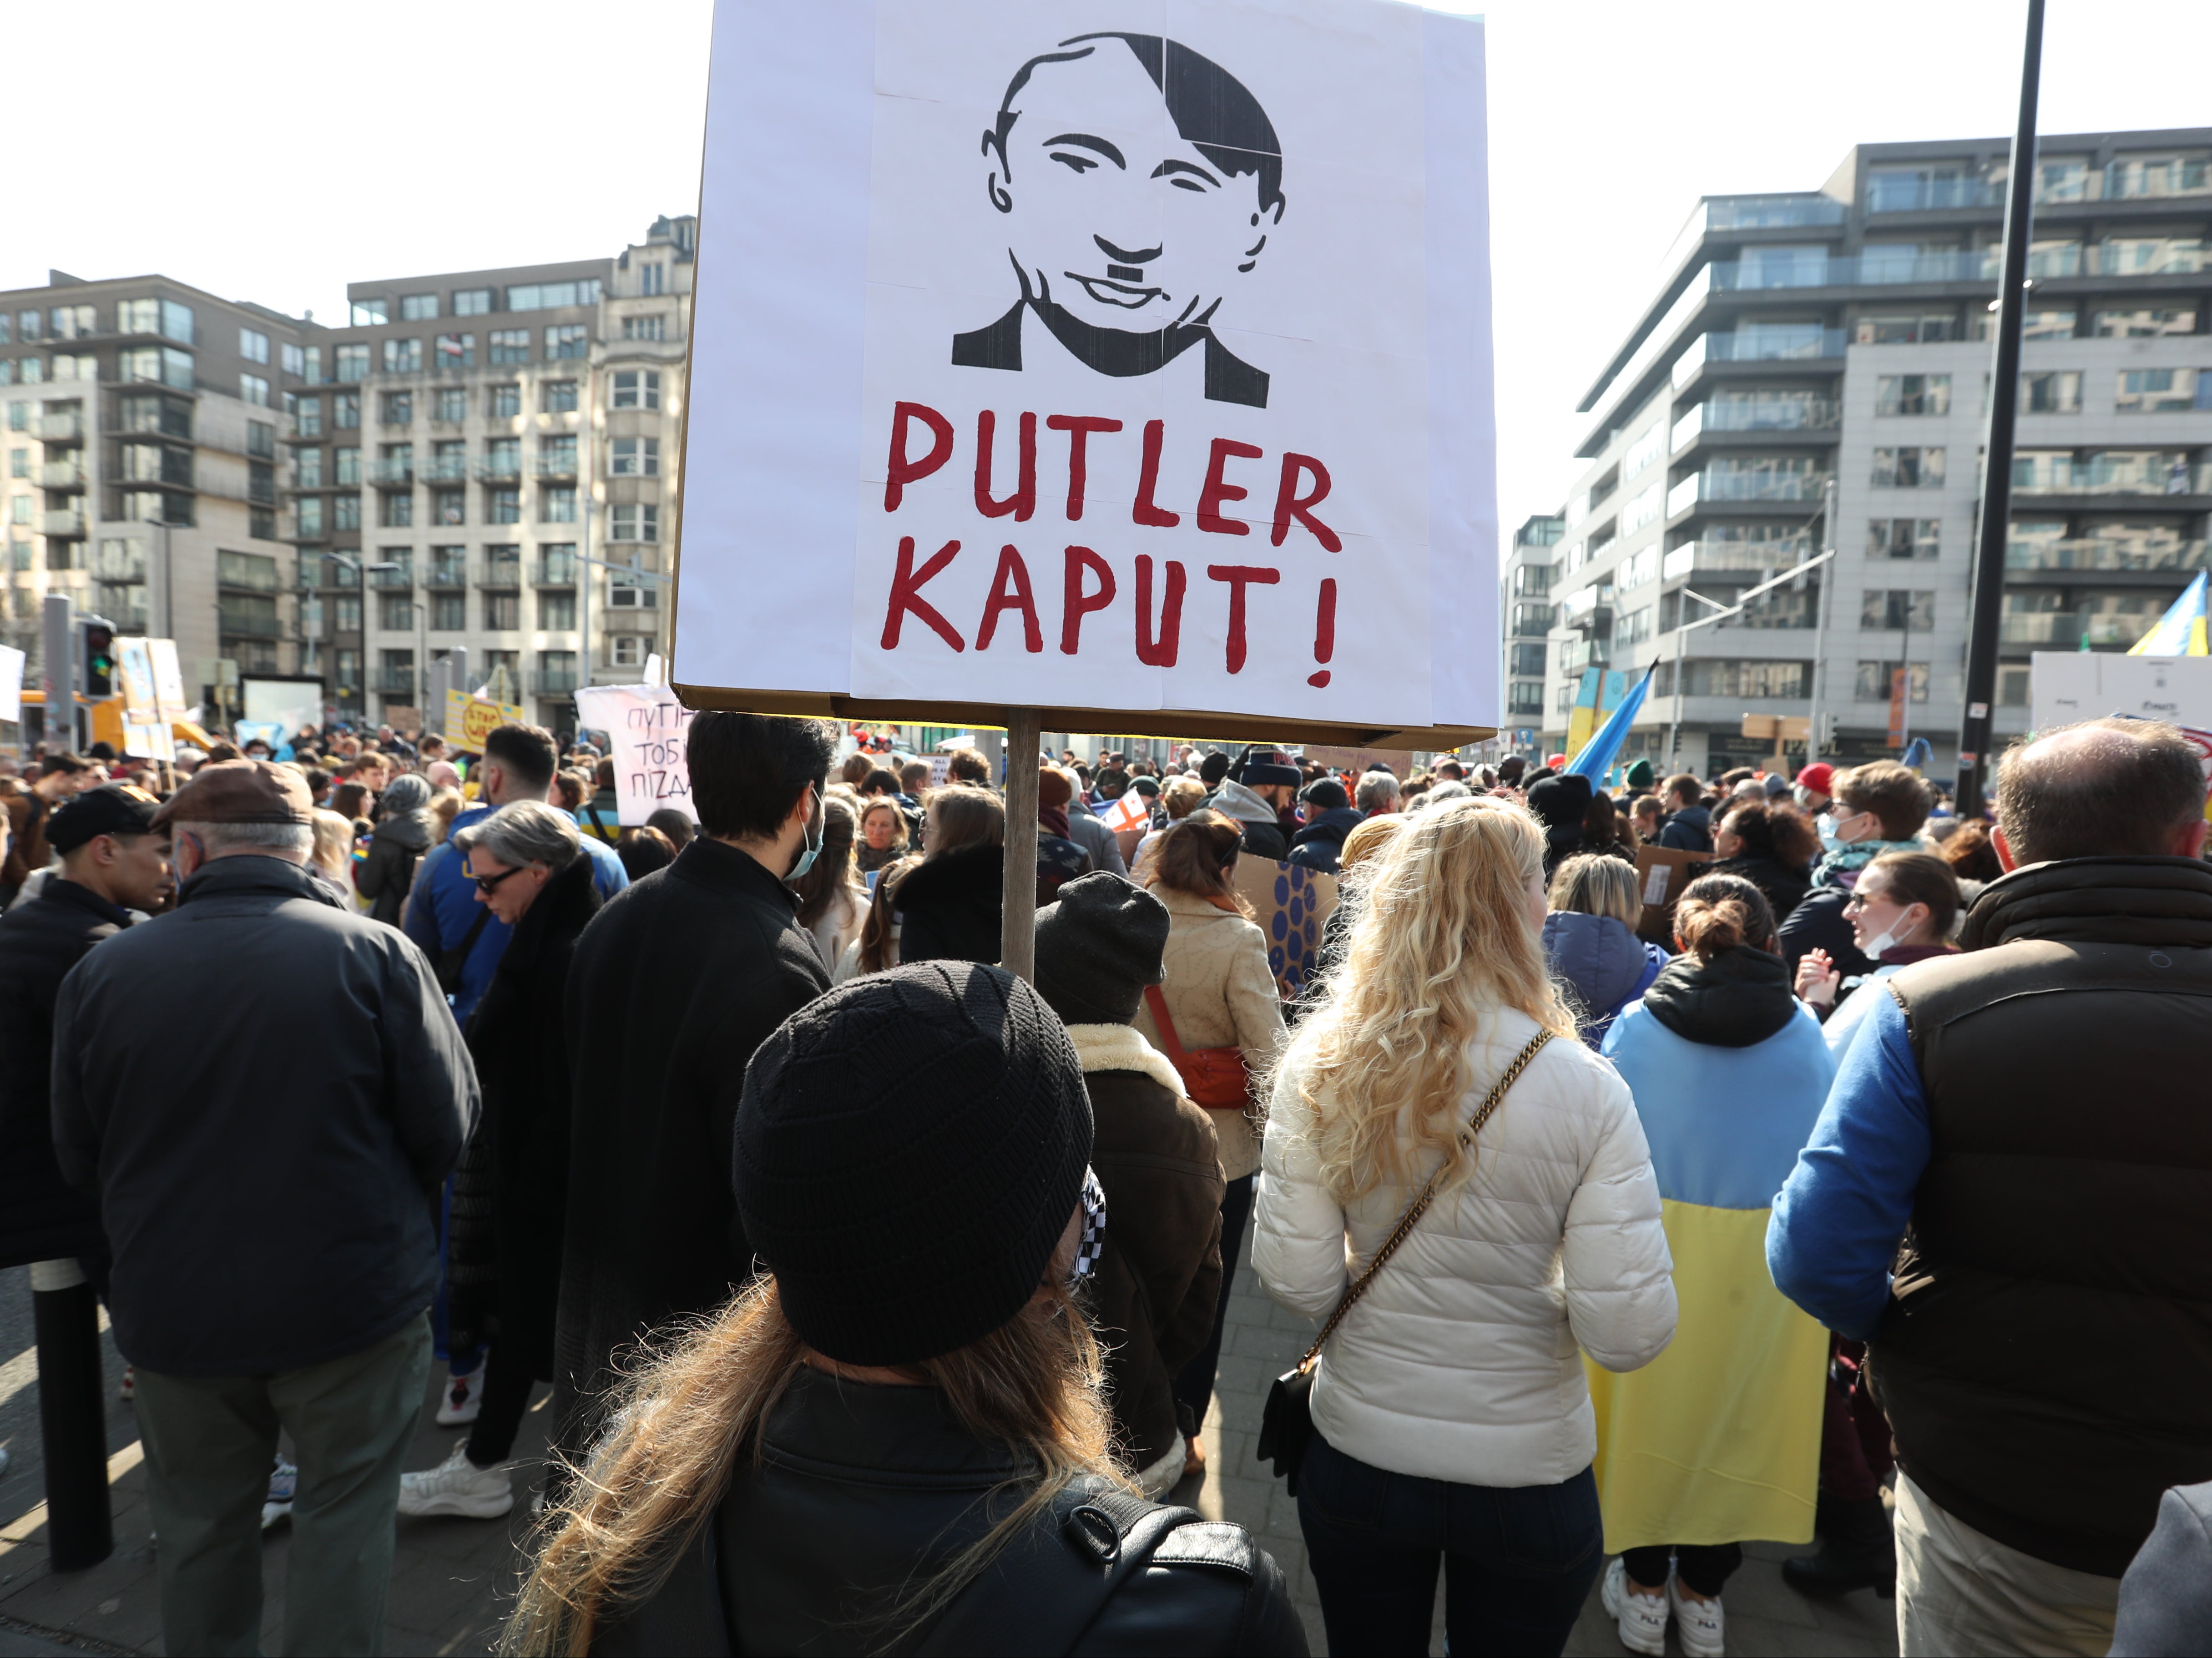 <p>A protester in Brussels carries a sign that shows a mash-up portrait of Putin and Hitler</p>